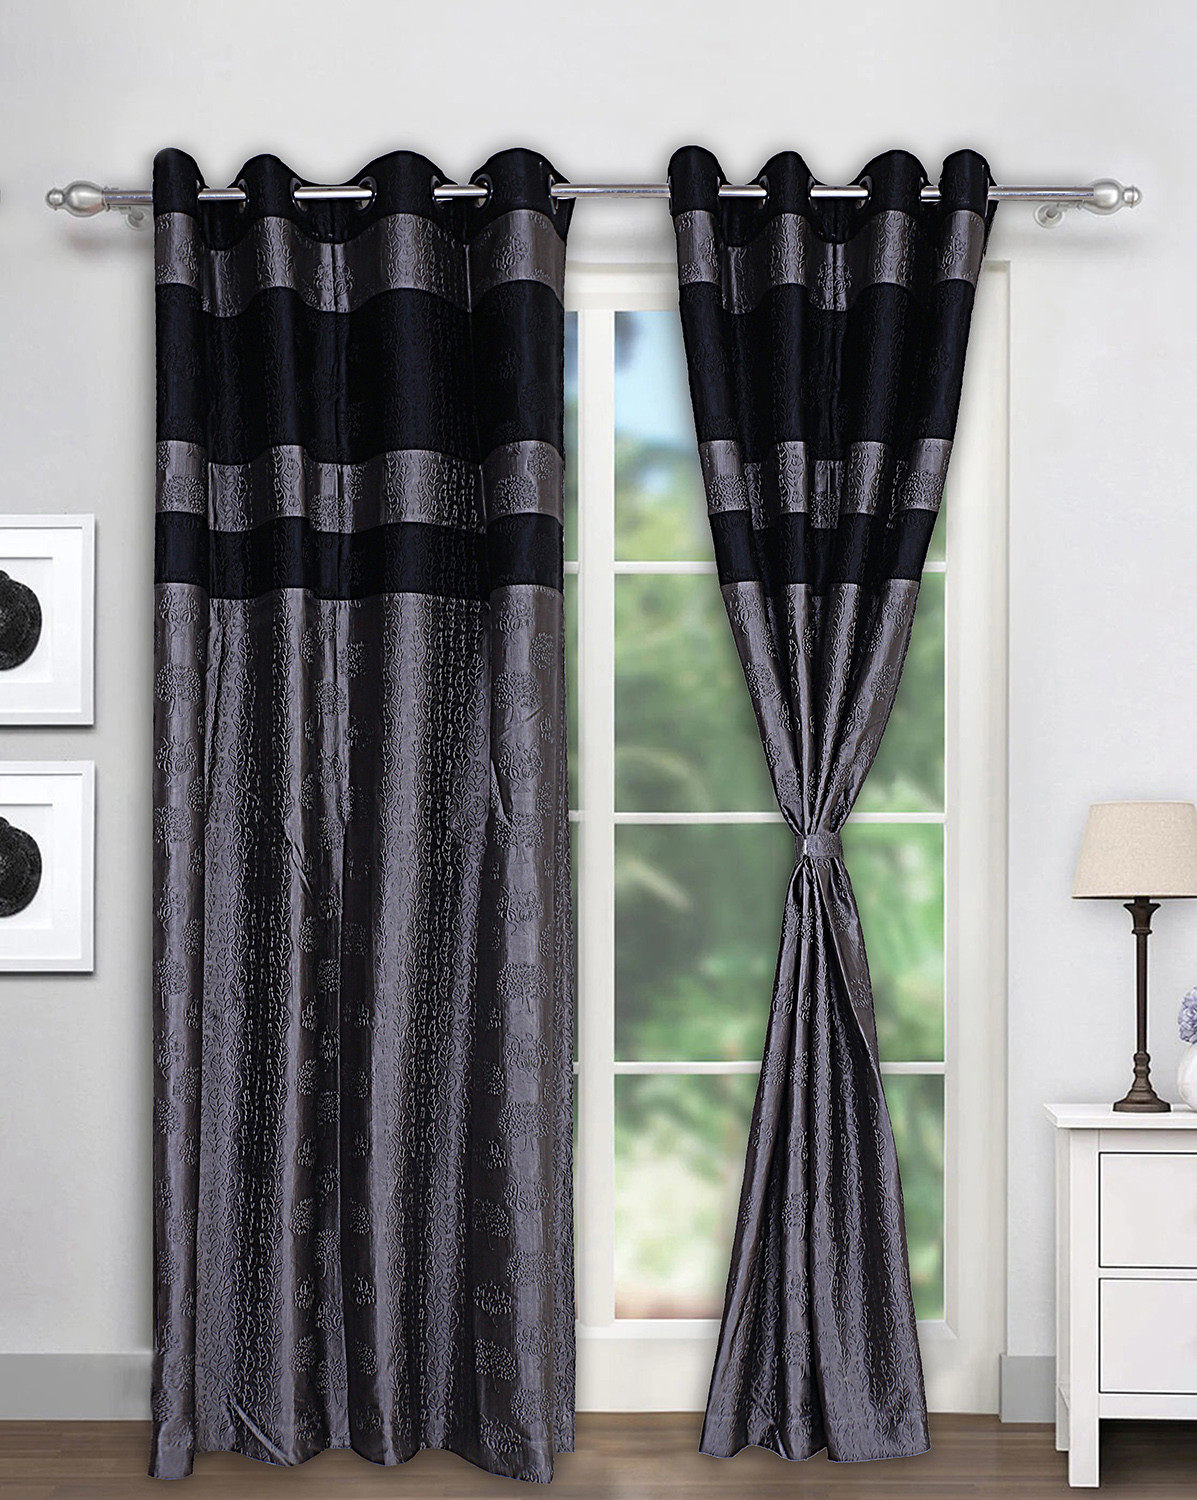 Kuber Industries Polyester Decorative 7 Feet Door Curtain |Embroidered Design Blackout Drapes Curatin With 8 Eyelet For Home & Office (Gray & Black)